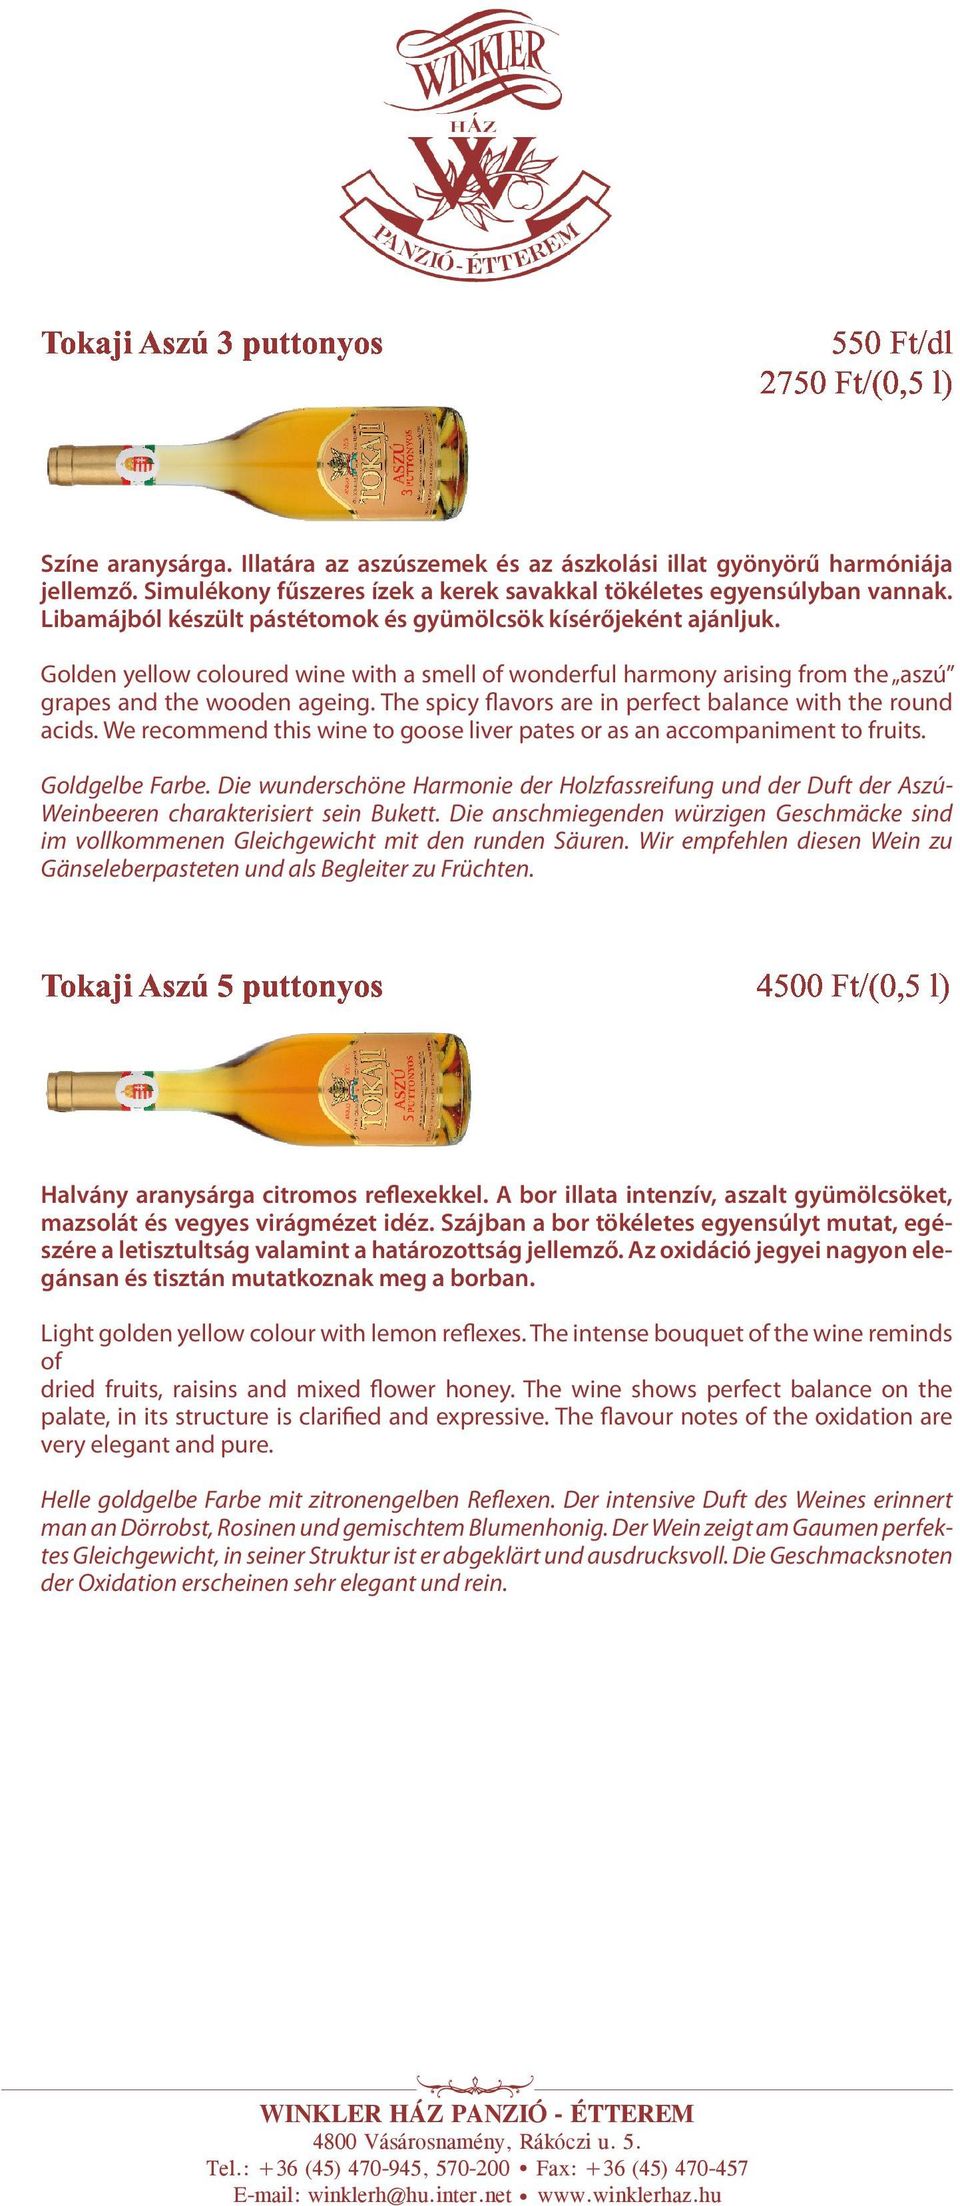 The spicy flavors are in perfect balance with the round acids. We recommend this wine to goose liver pates or as an accompaniment to fruits. Goldgelbe Farbe.